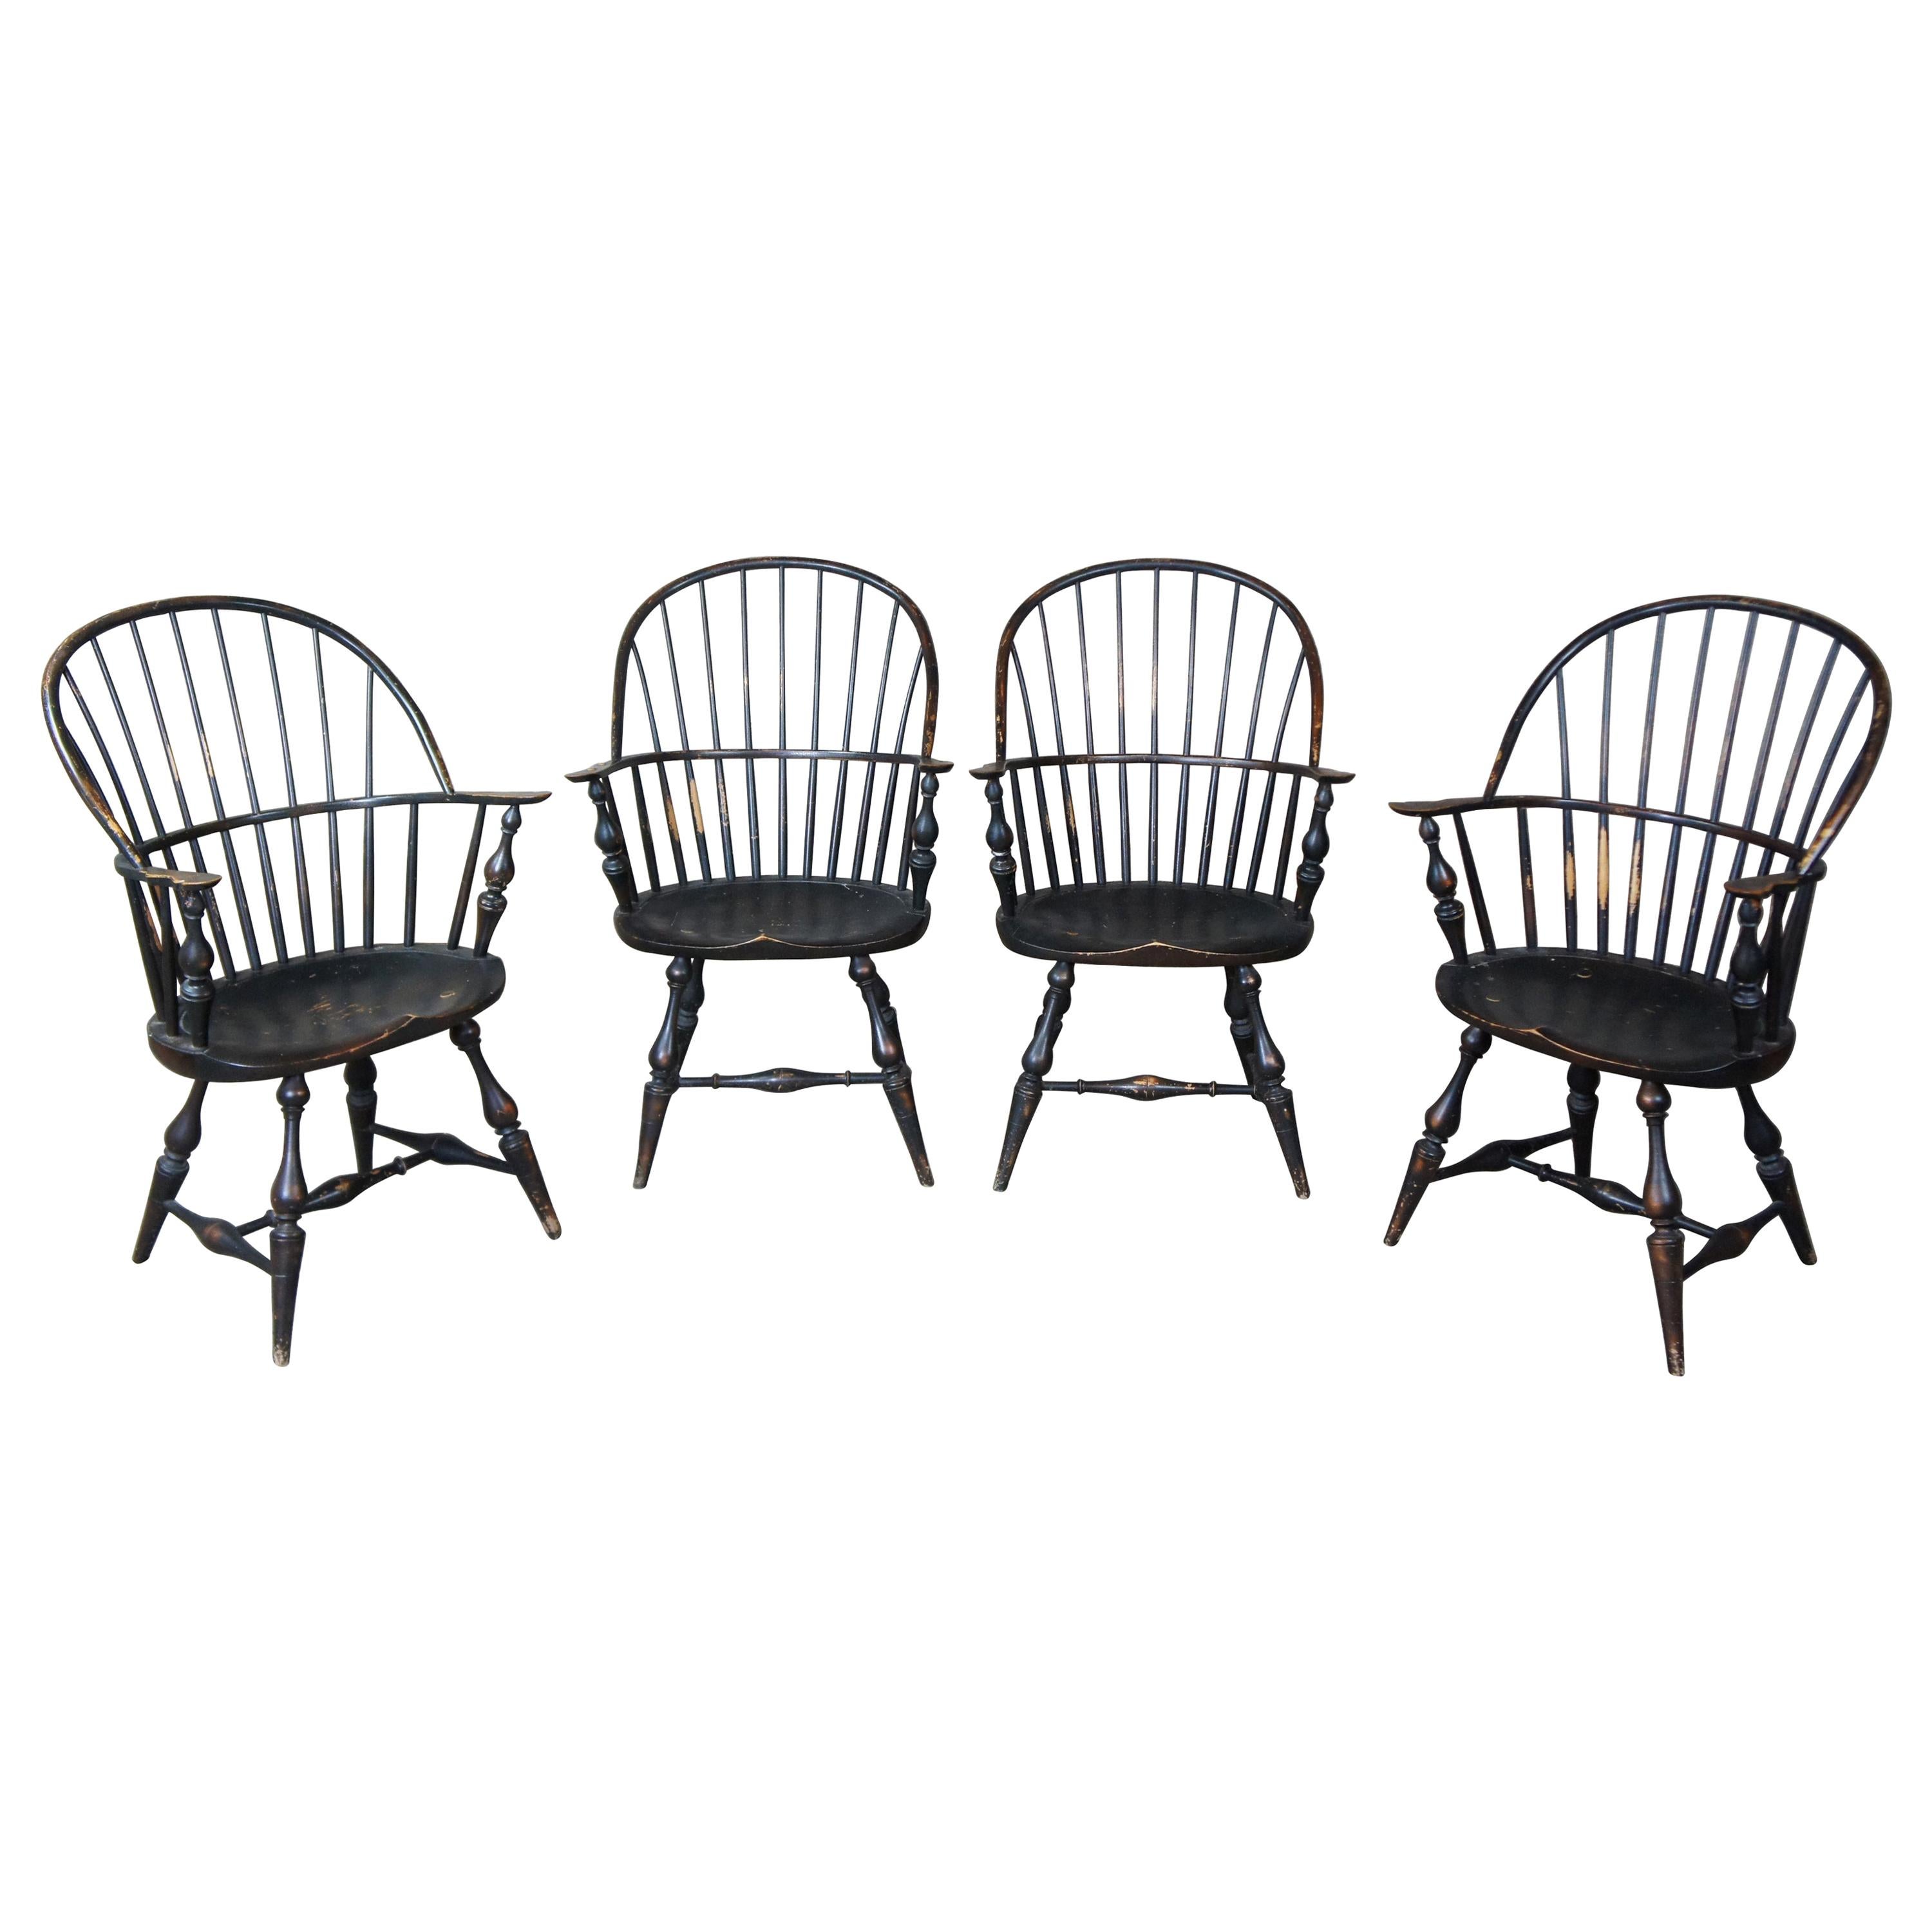 4 River Bend Chair Co. Windsor Bow Back Colonial Dining Armchairs Black Crackle